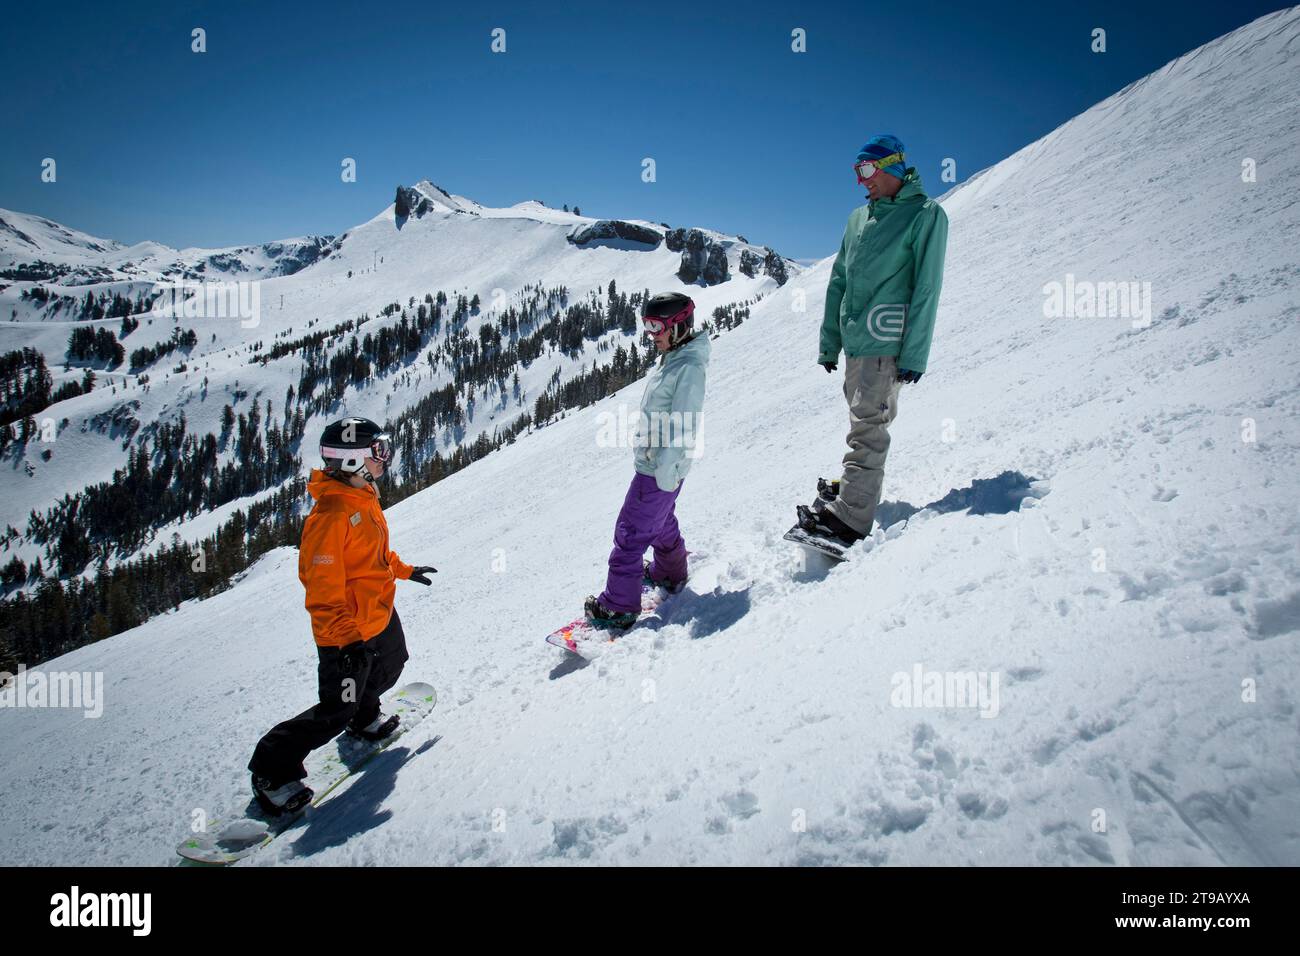 Snowboard instructor giving a lesson at a ski resort. Stock Photo